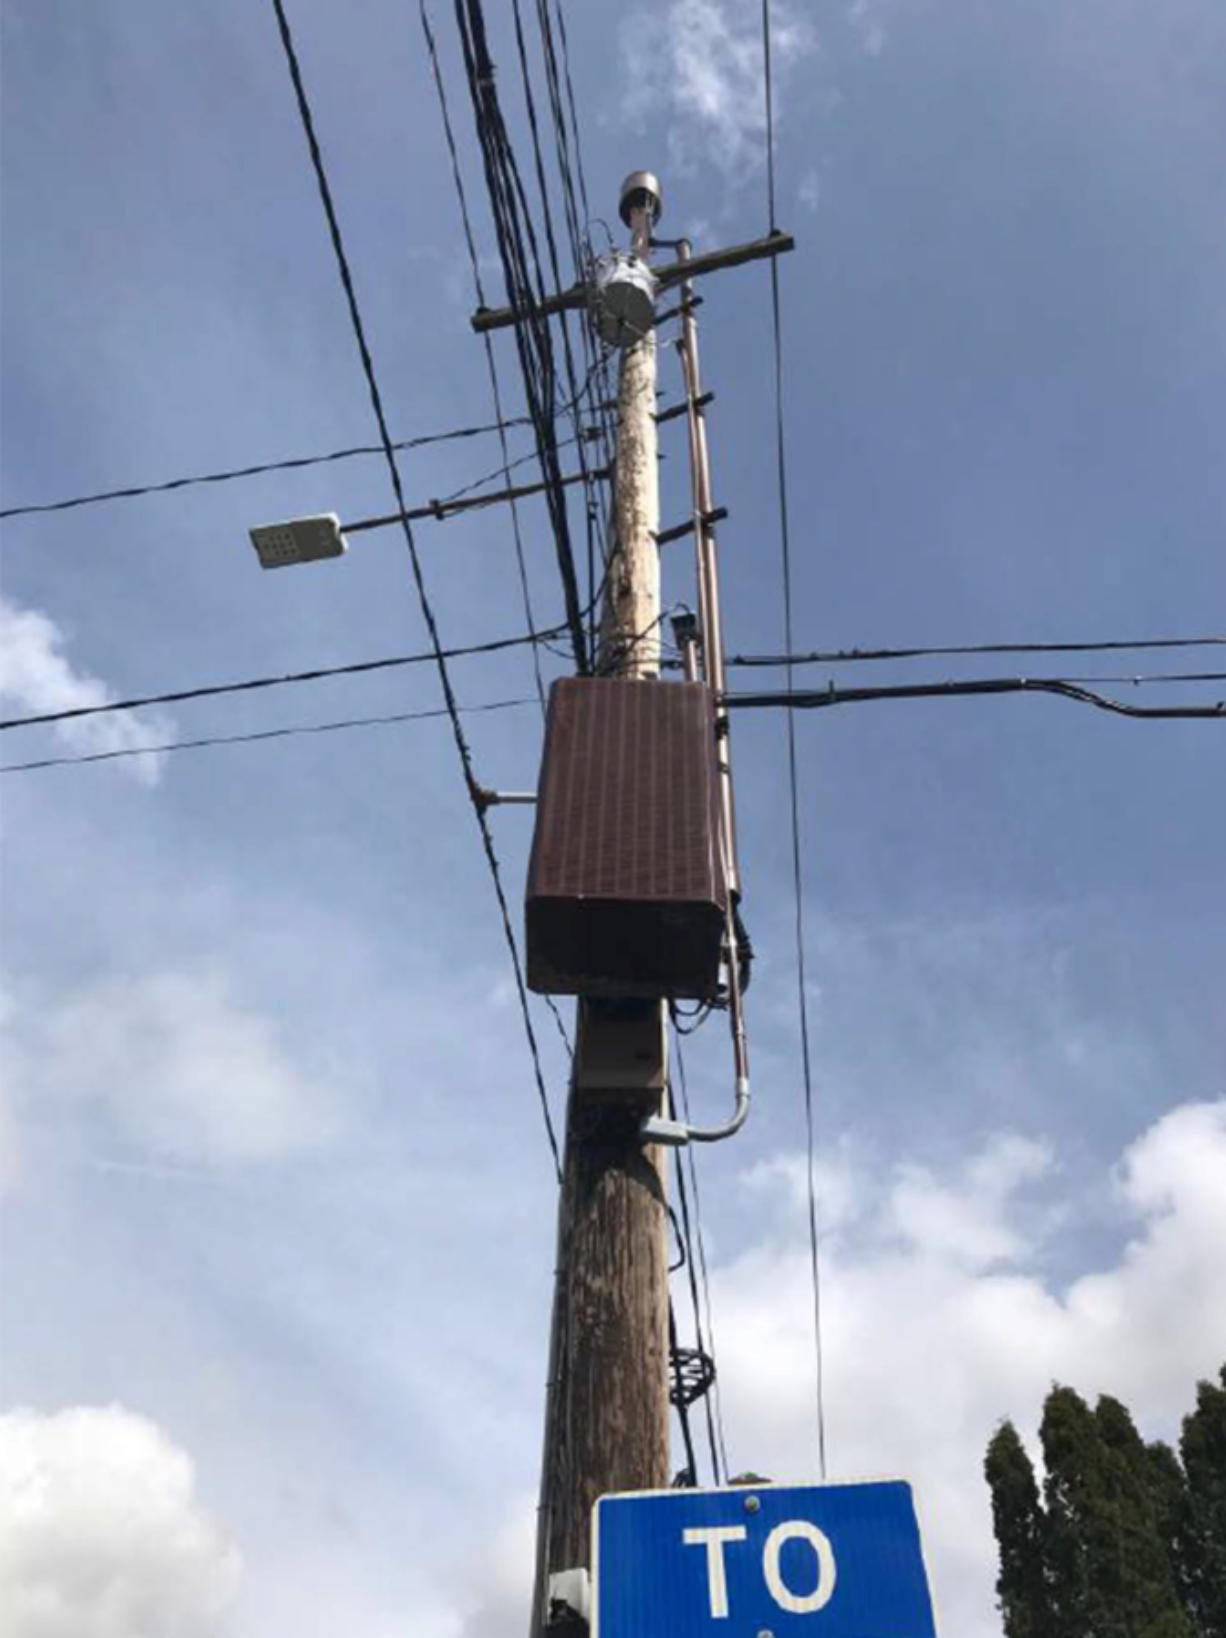 An example of how small cell equipment could look. A box on the pole contains part of the equipment, while the antennas are mounted at or near the top.